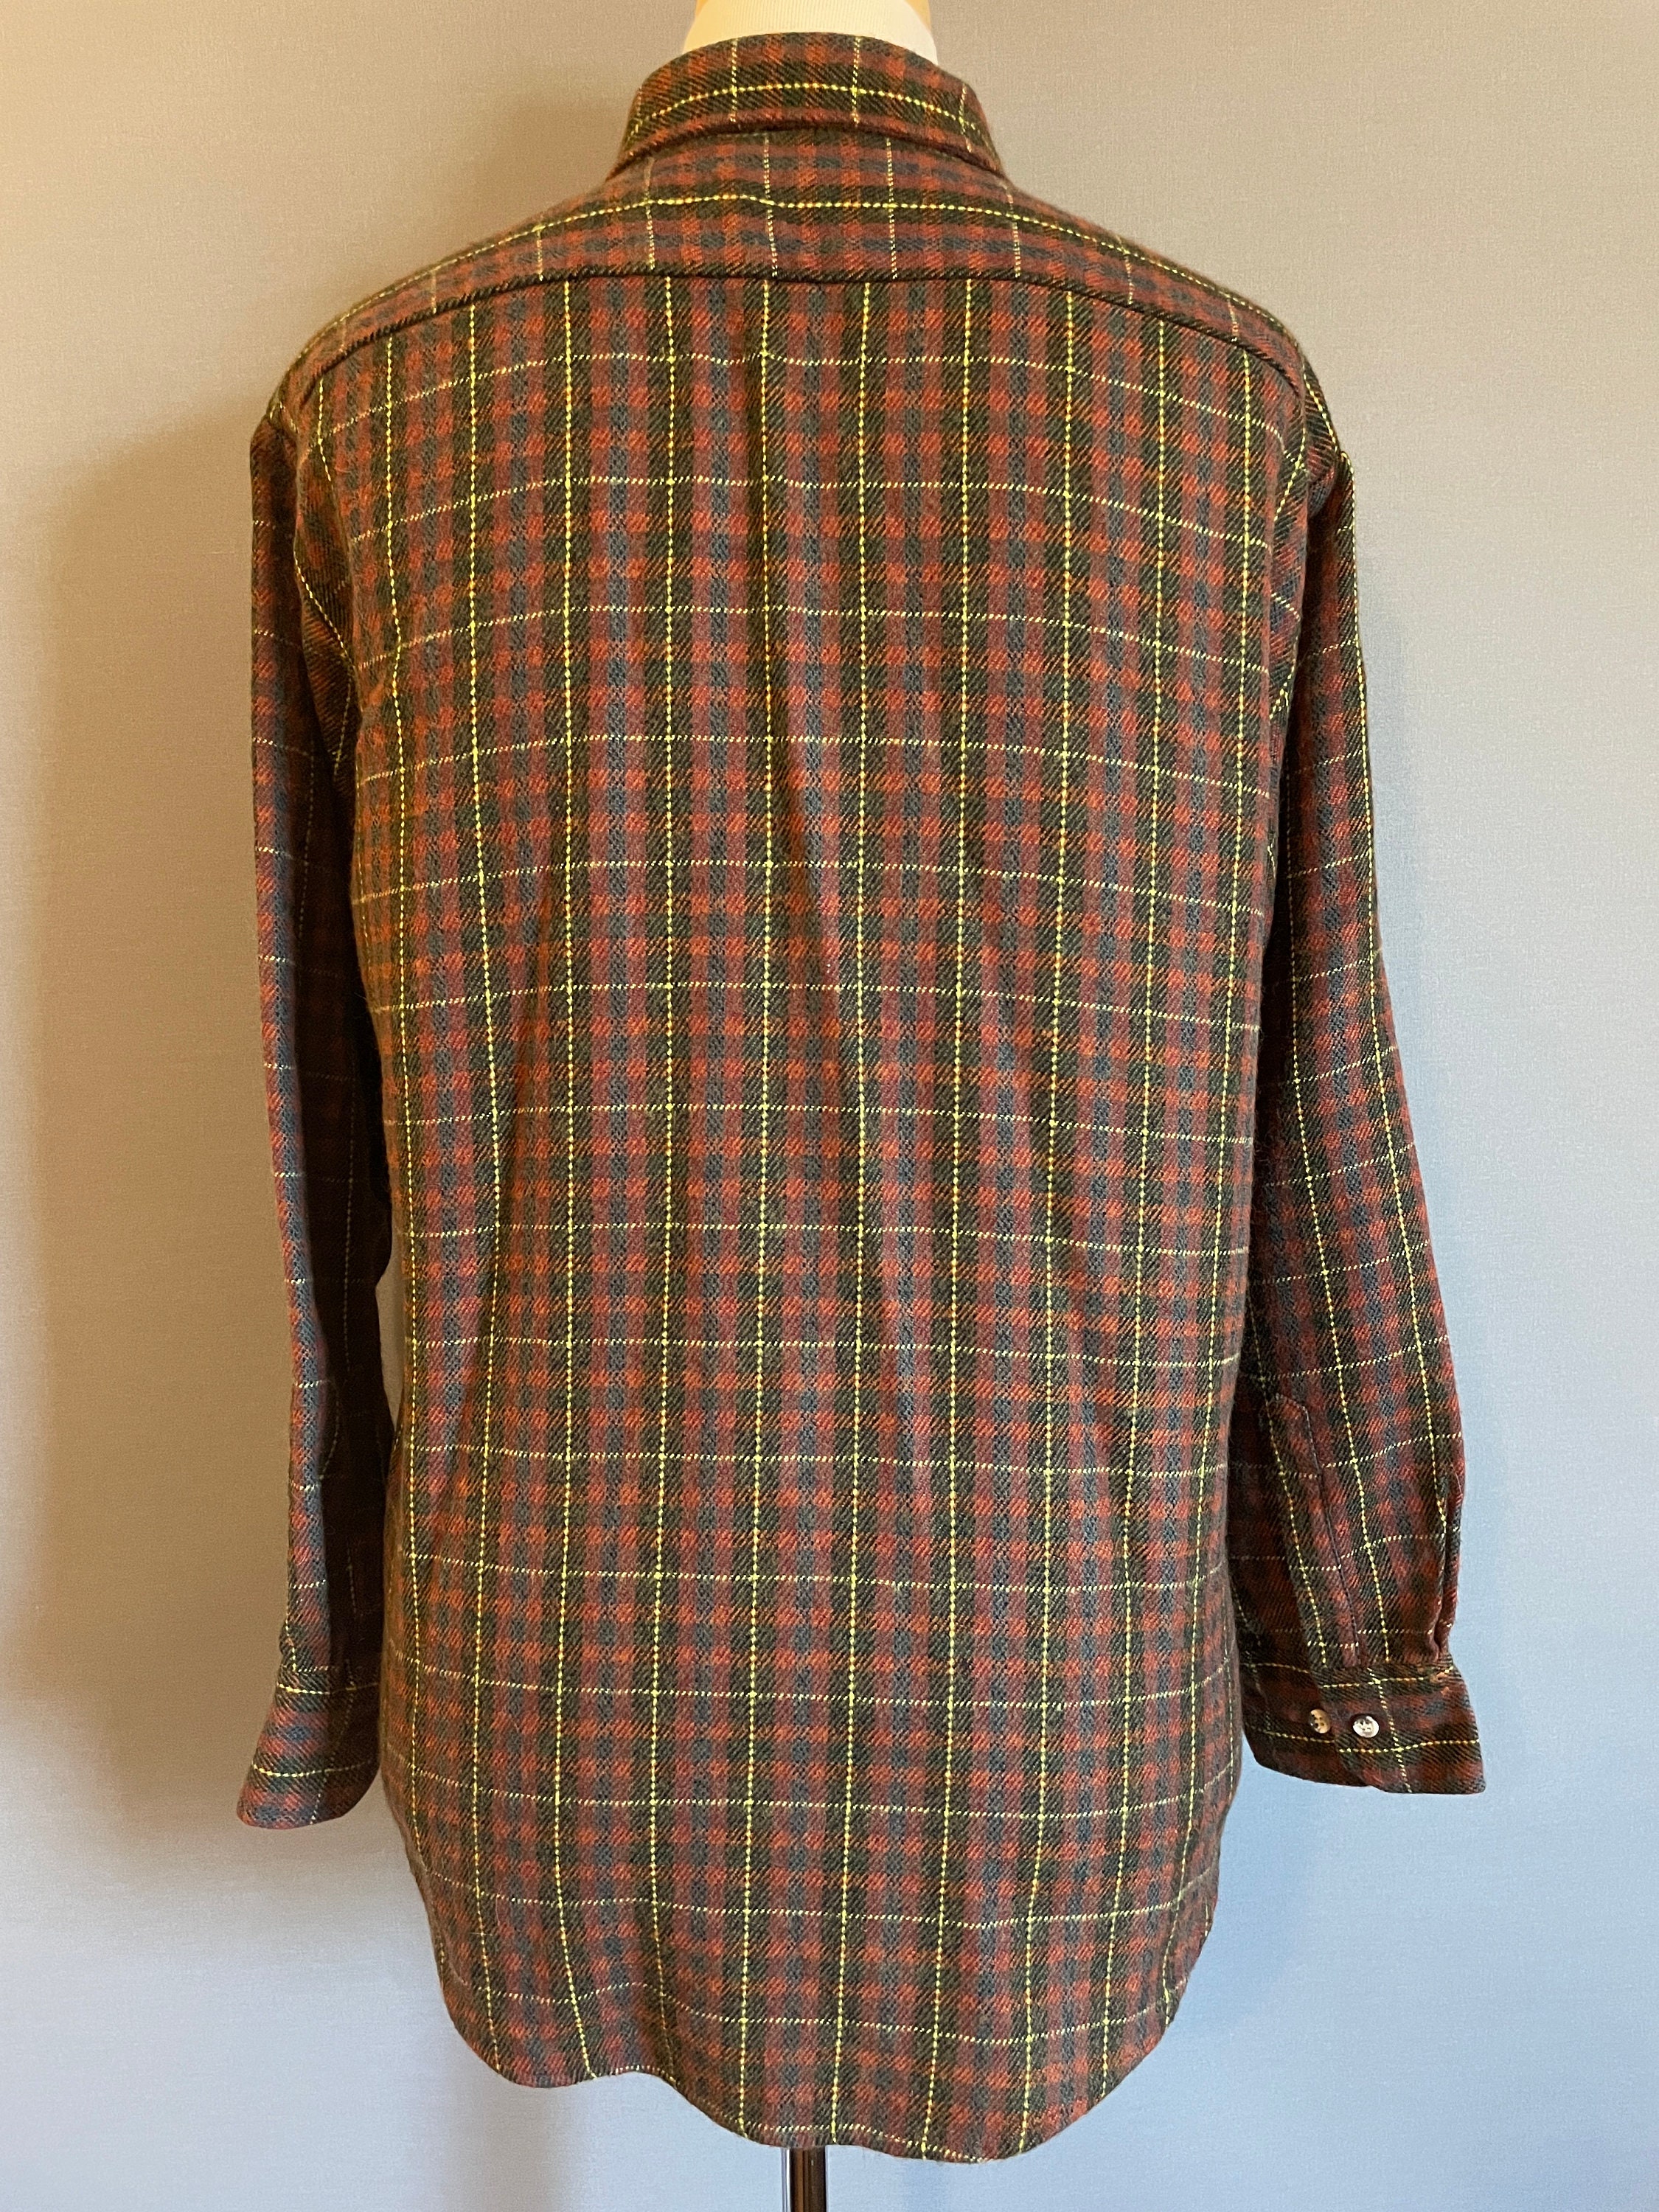 Red/Gold/Navy Plaid Men's Flannel Button-Down Shirt c1980s | Etsy